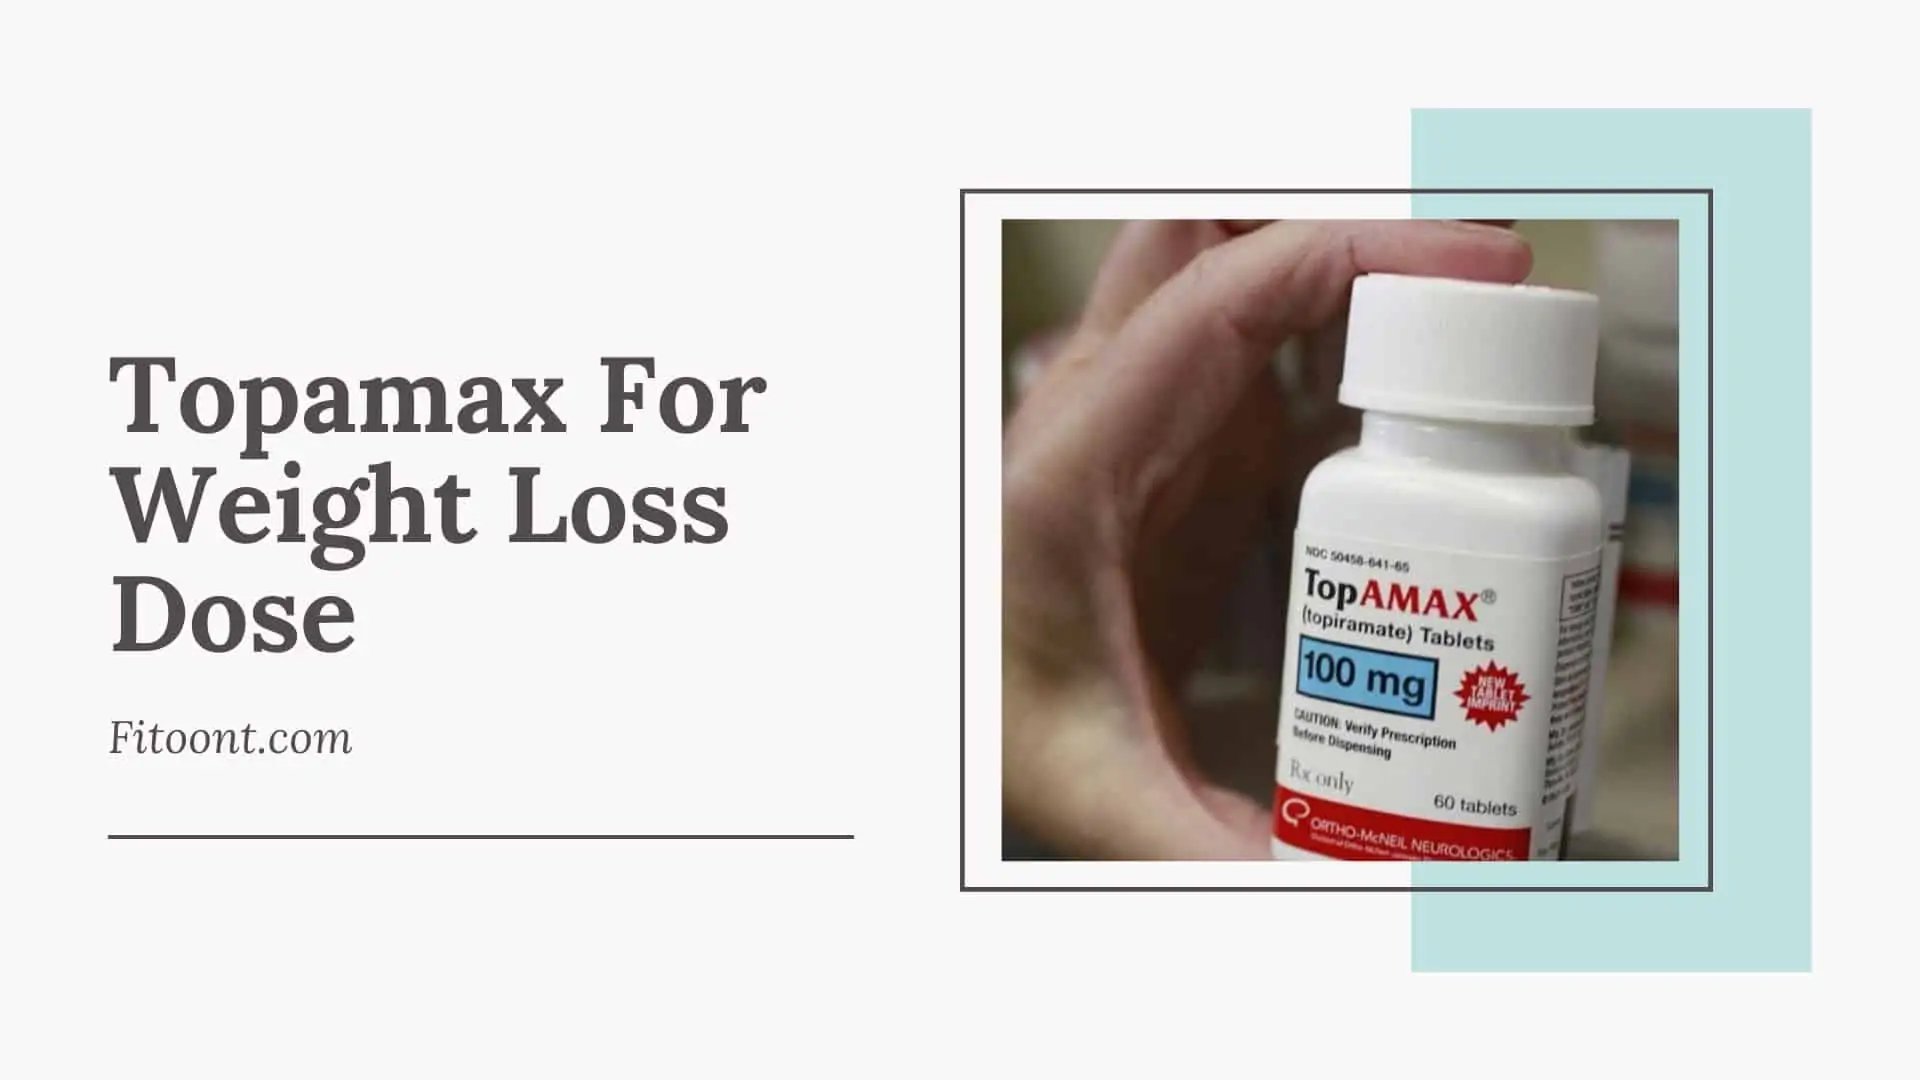 Topamax For Weight Loss Dose - Fitoont